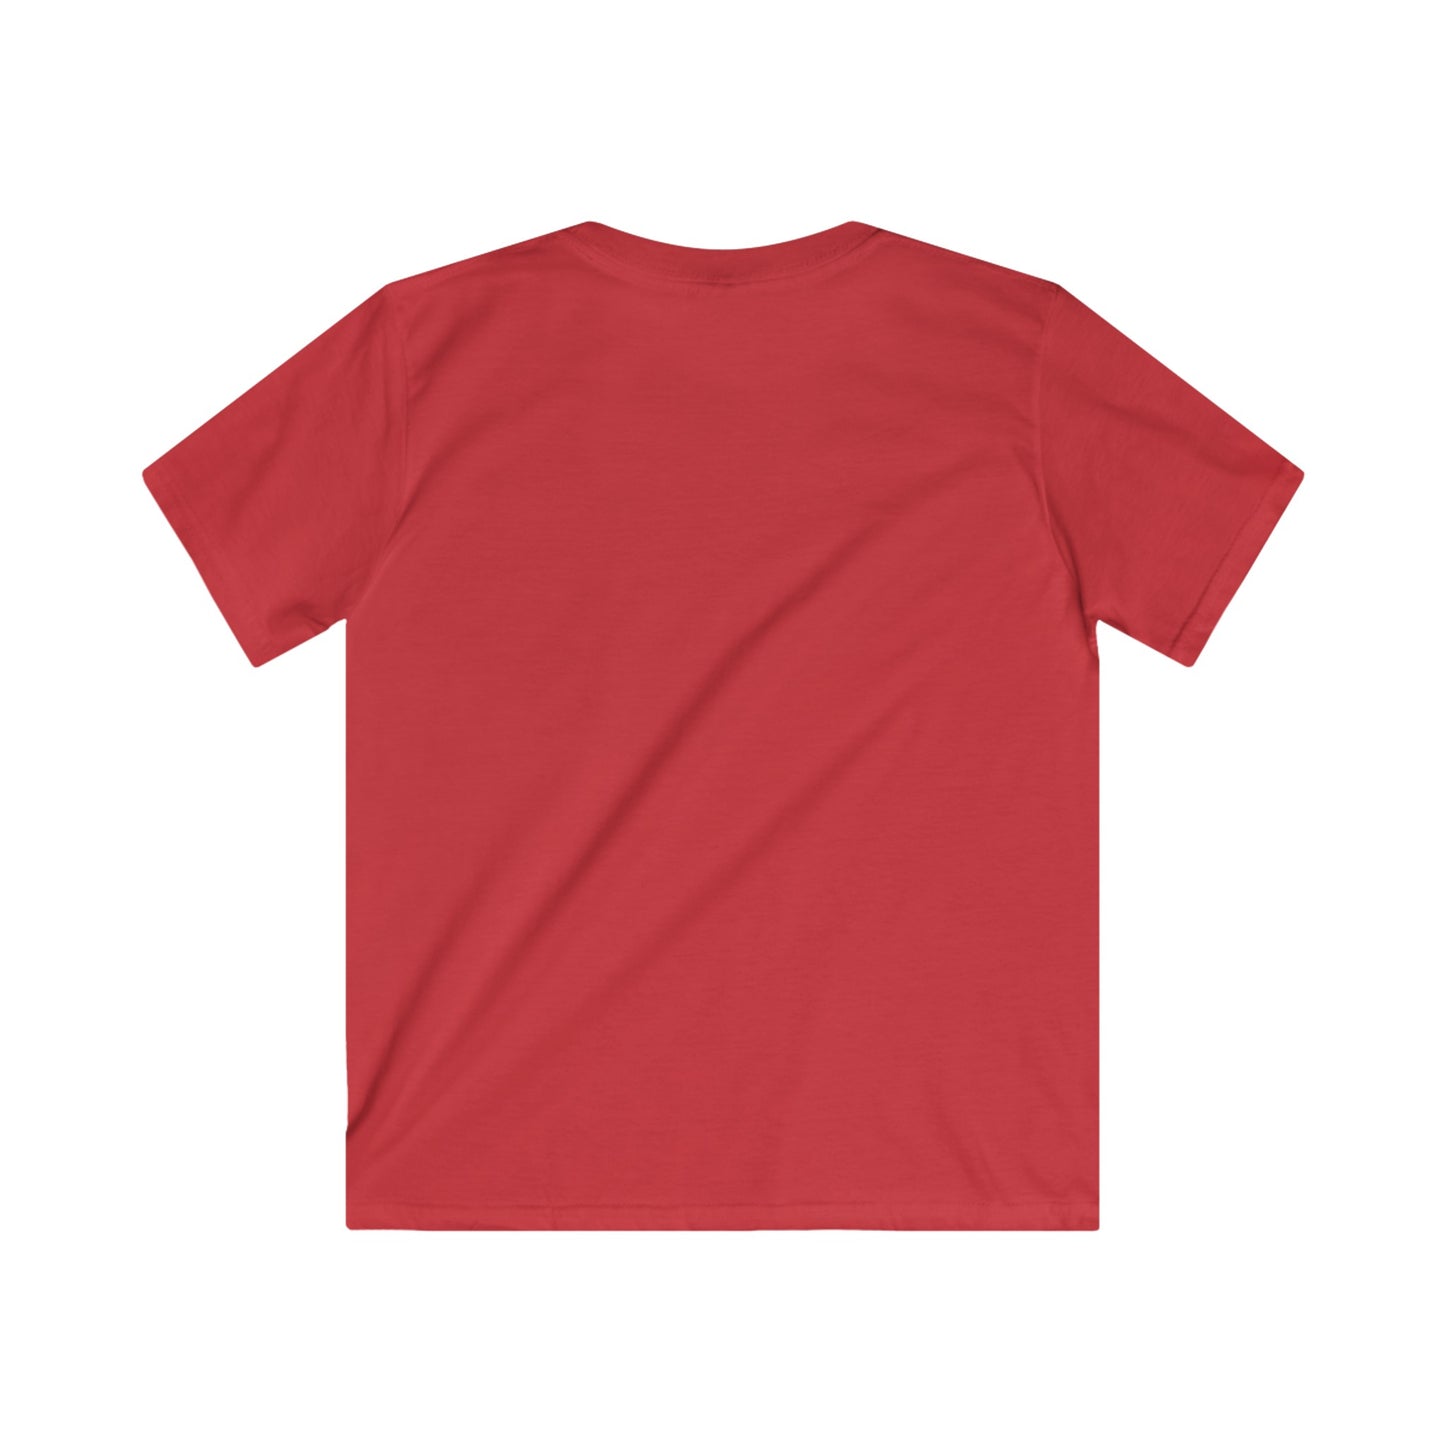 Solid Red. Kids Softstyle Tee